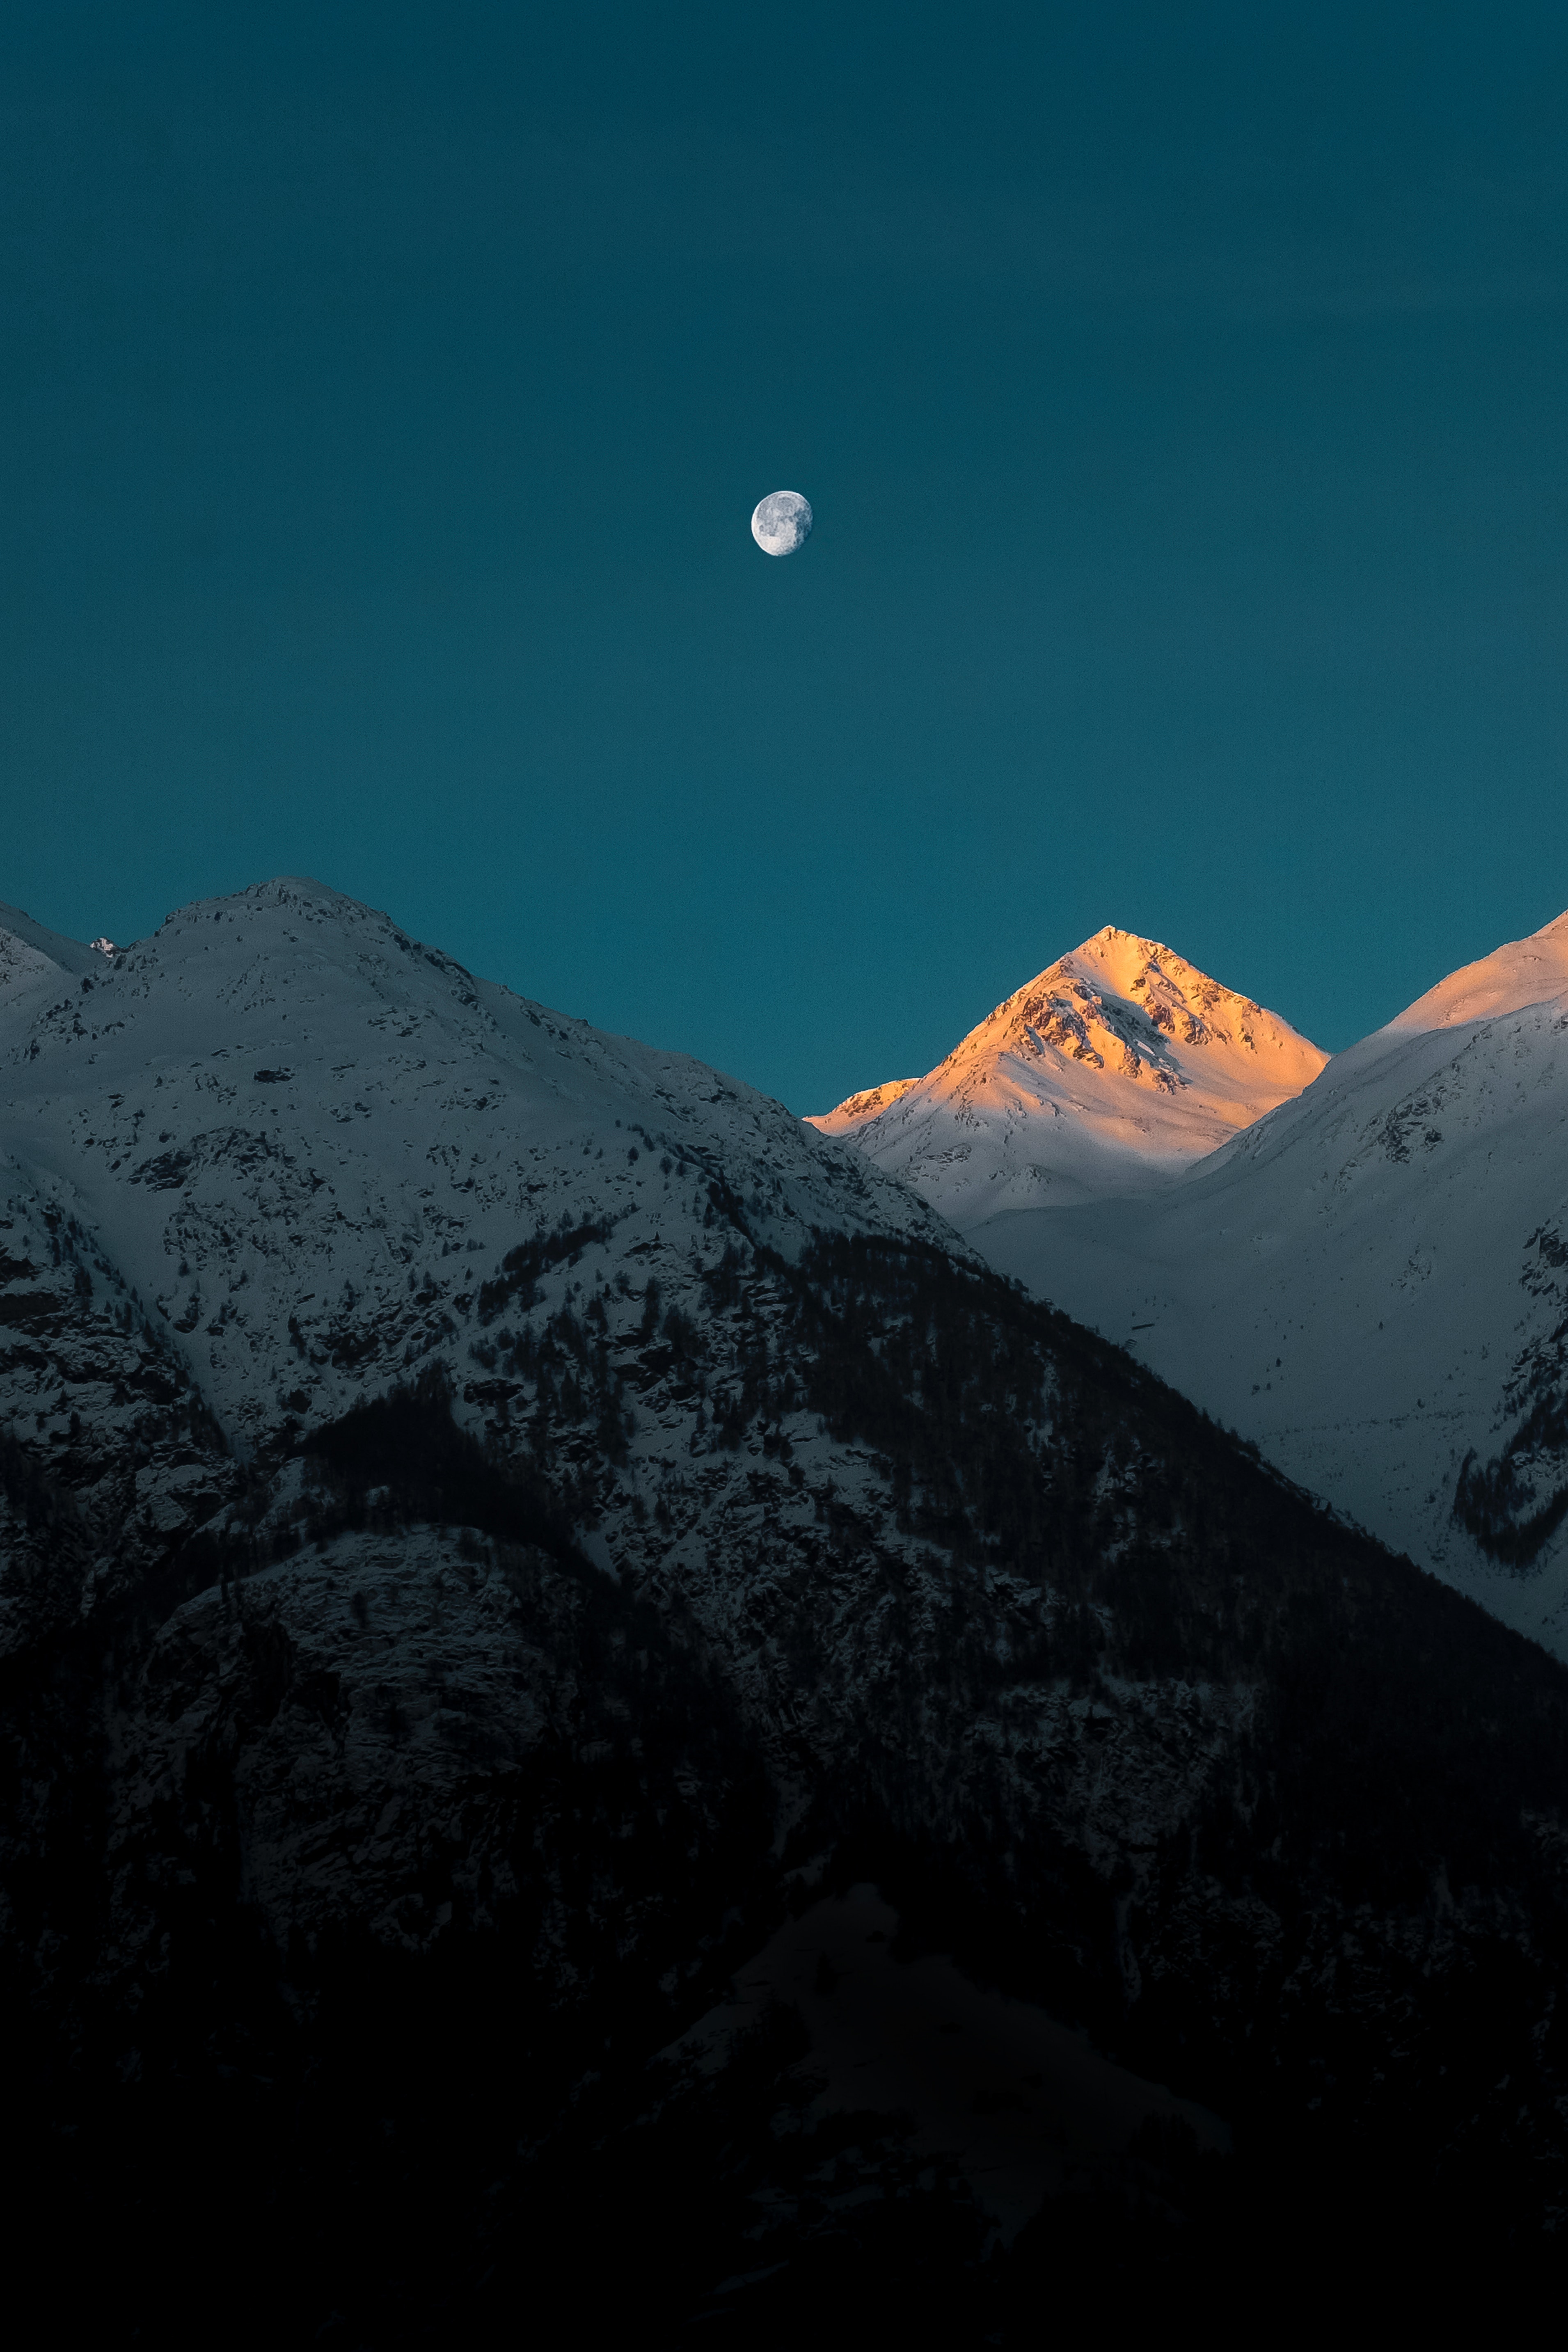 mountains, moon, vertex, nature, twilight, top, dusk, snowbound, snow covered High Definition image